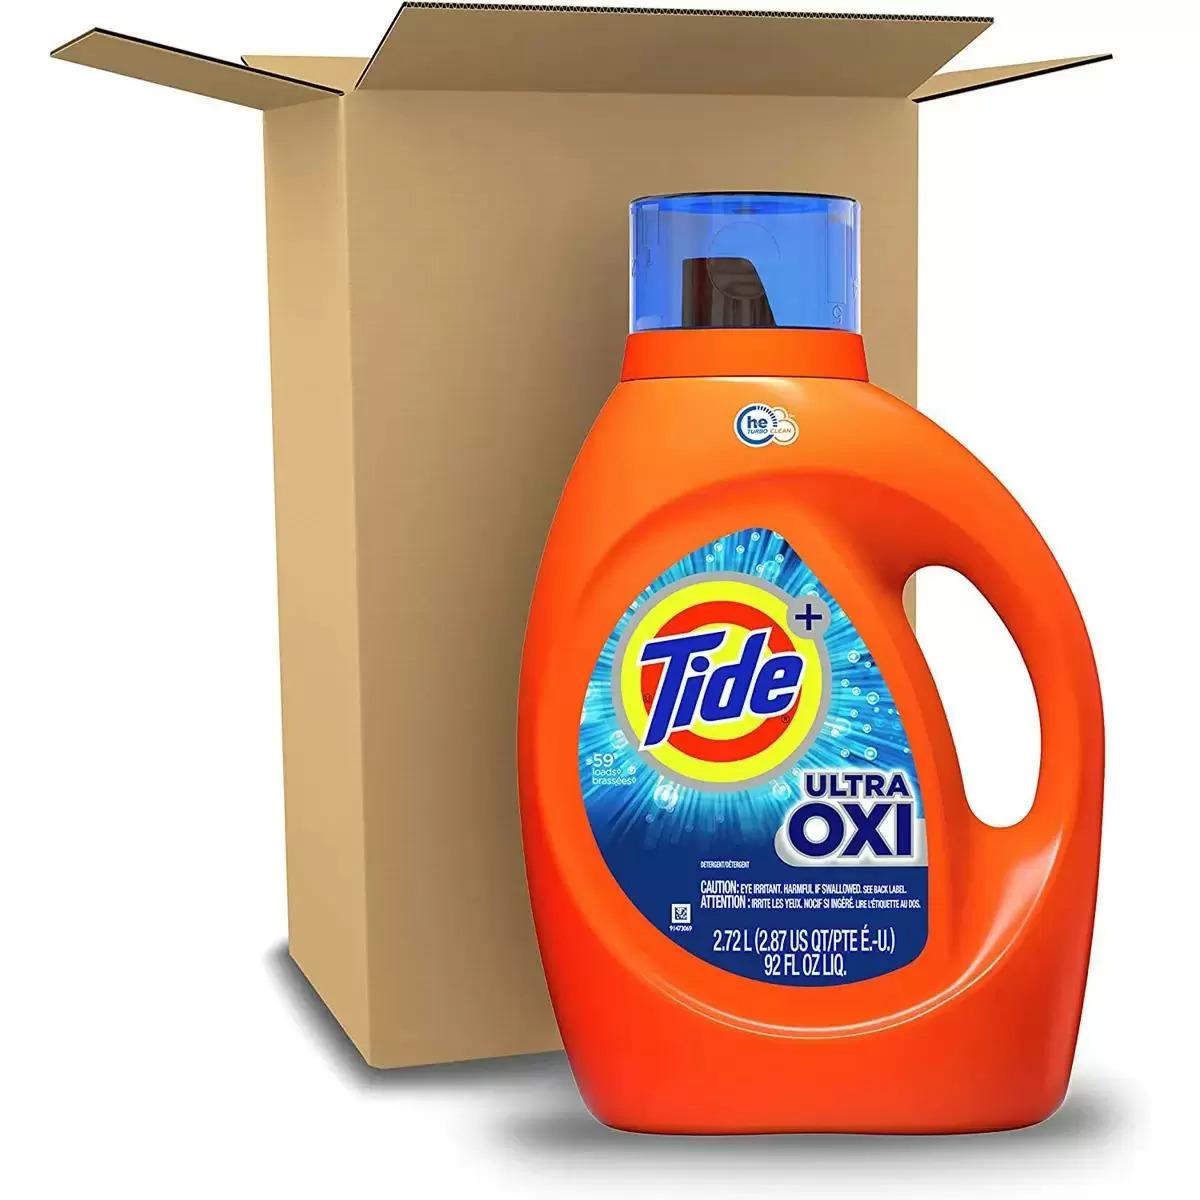 Tide Ultra Oxi Laundry Detergent Liquid Soap 3 Pack for $26.96 Shipped